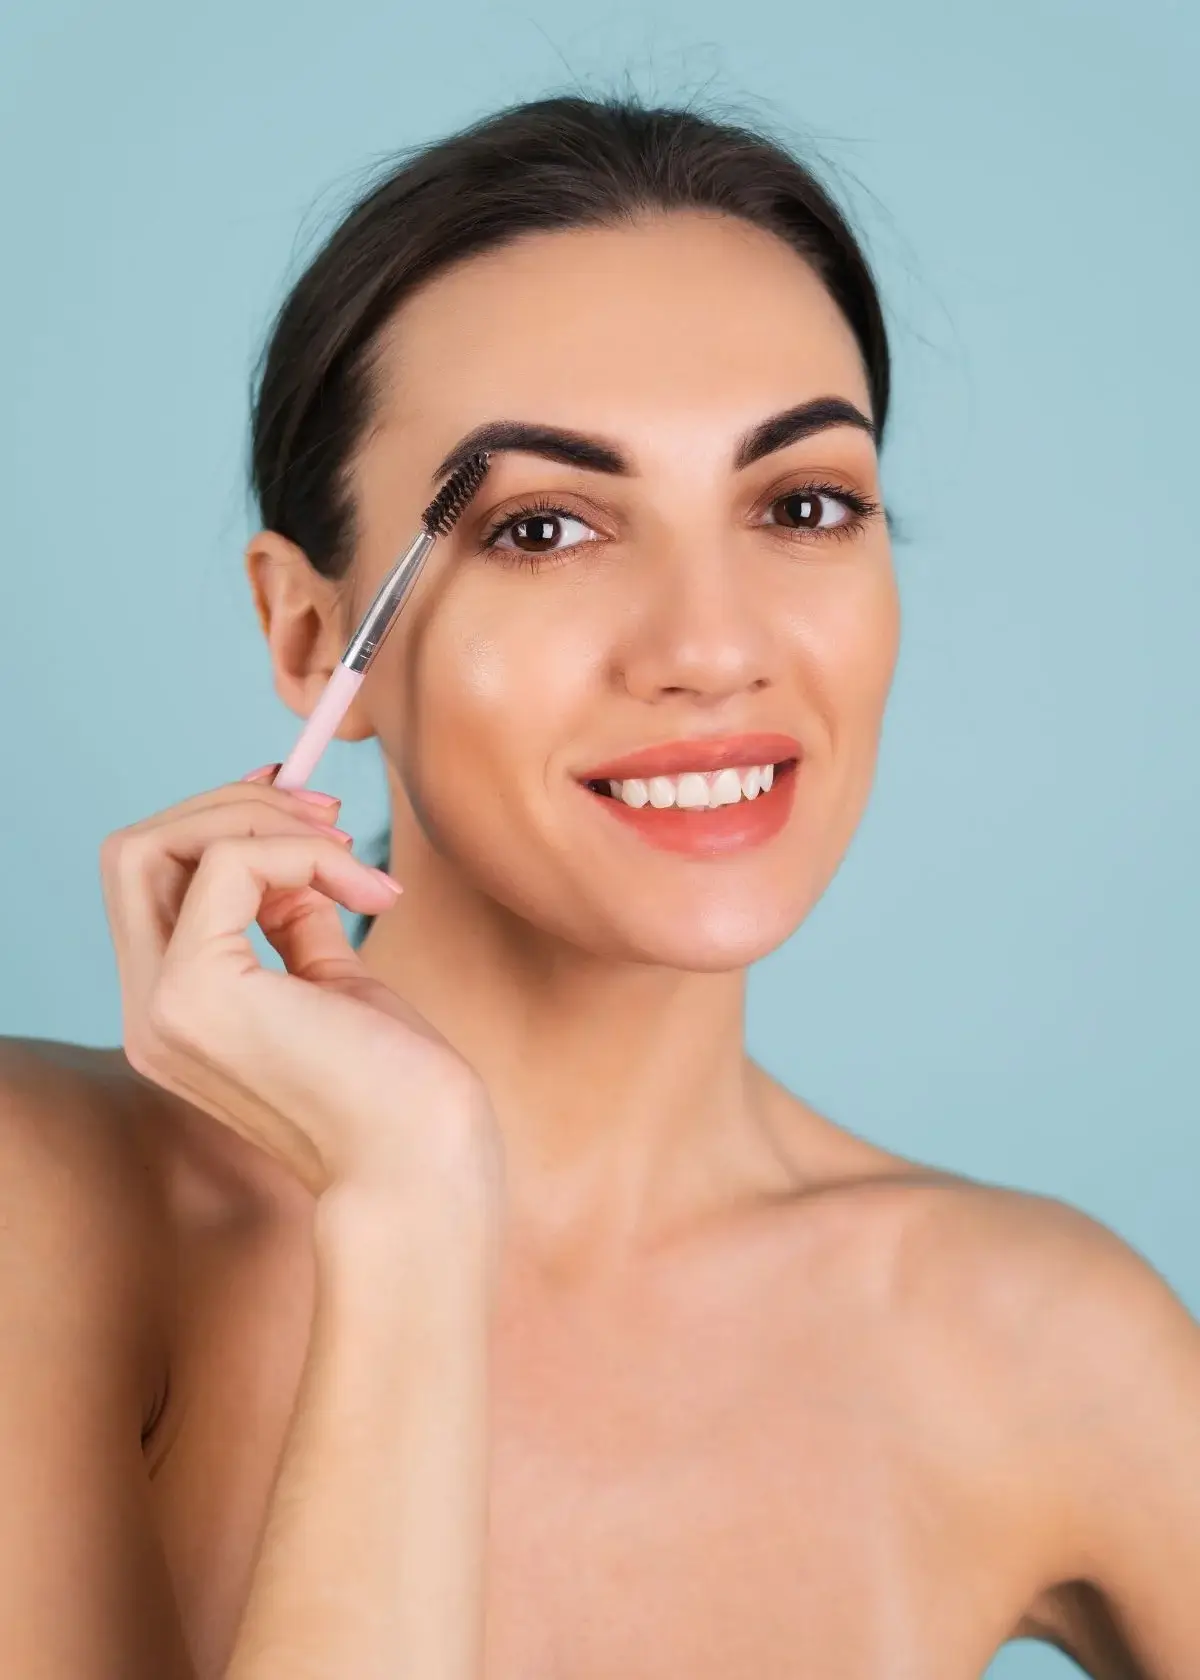 What factors should be considered when choosing the best concealer for eyebrows?